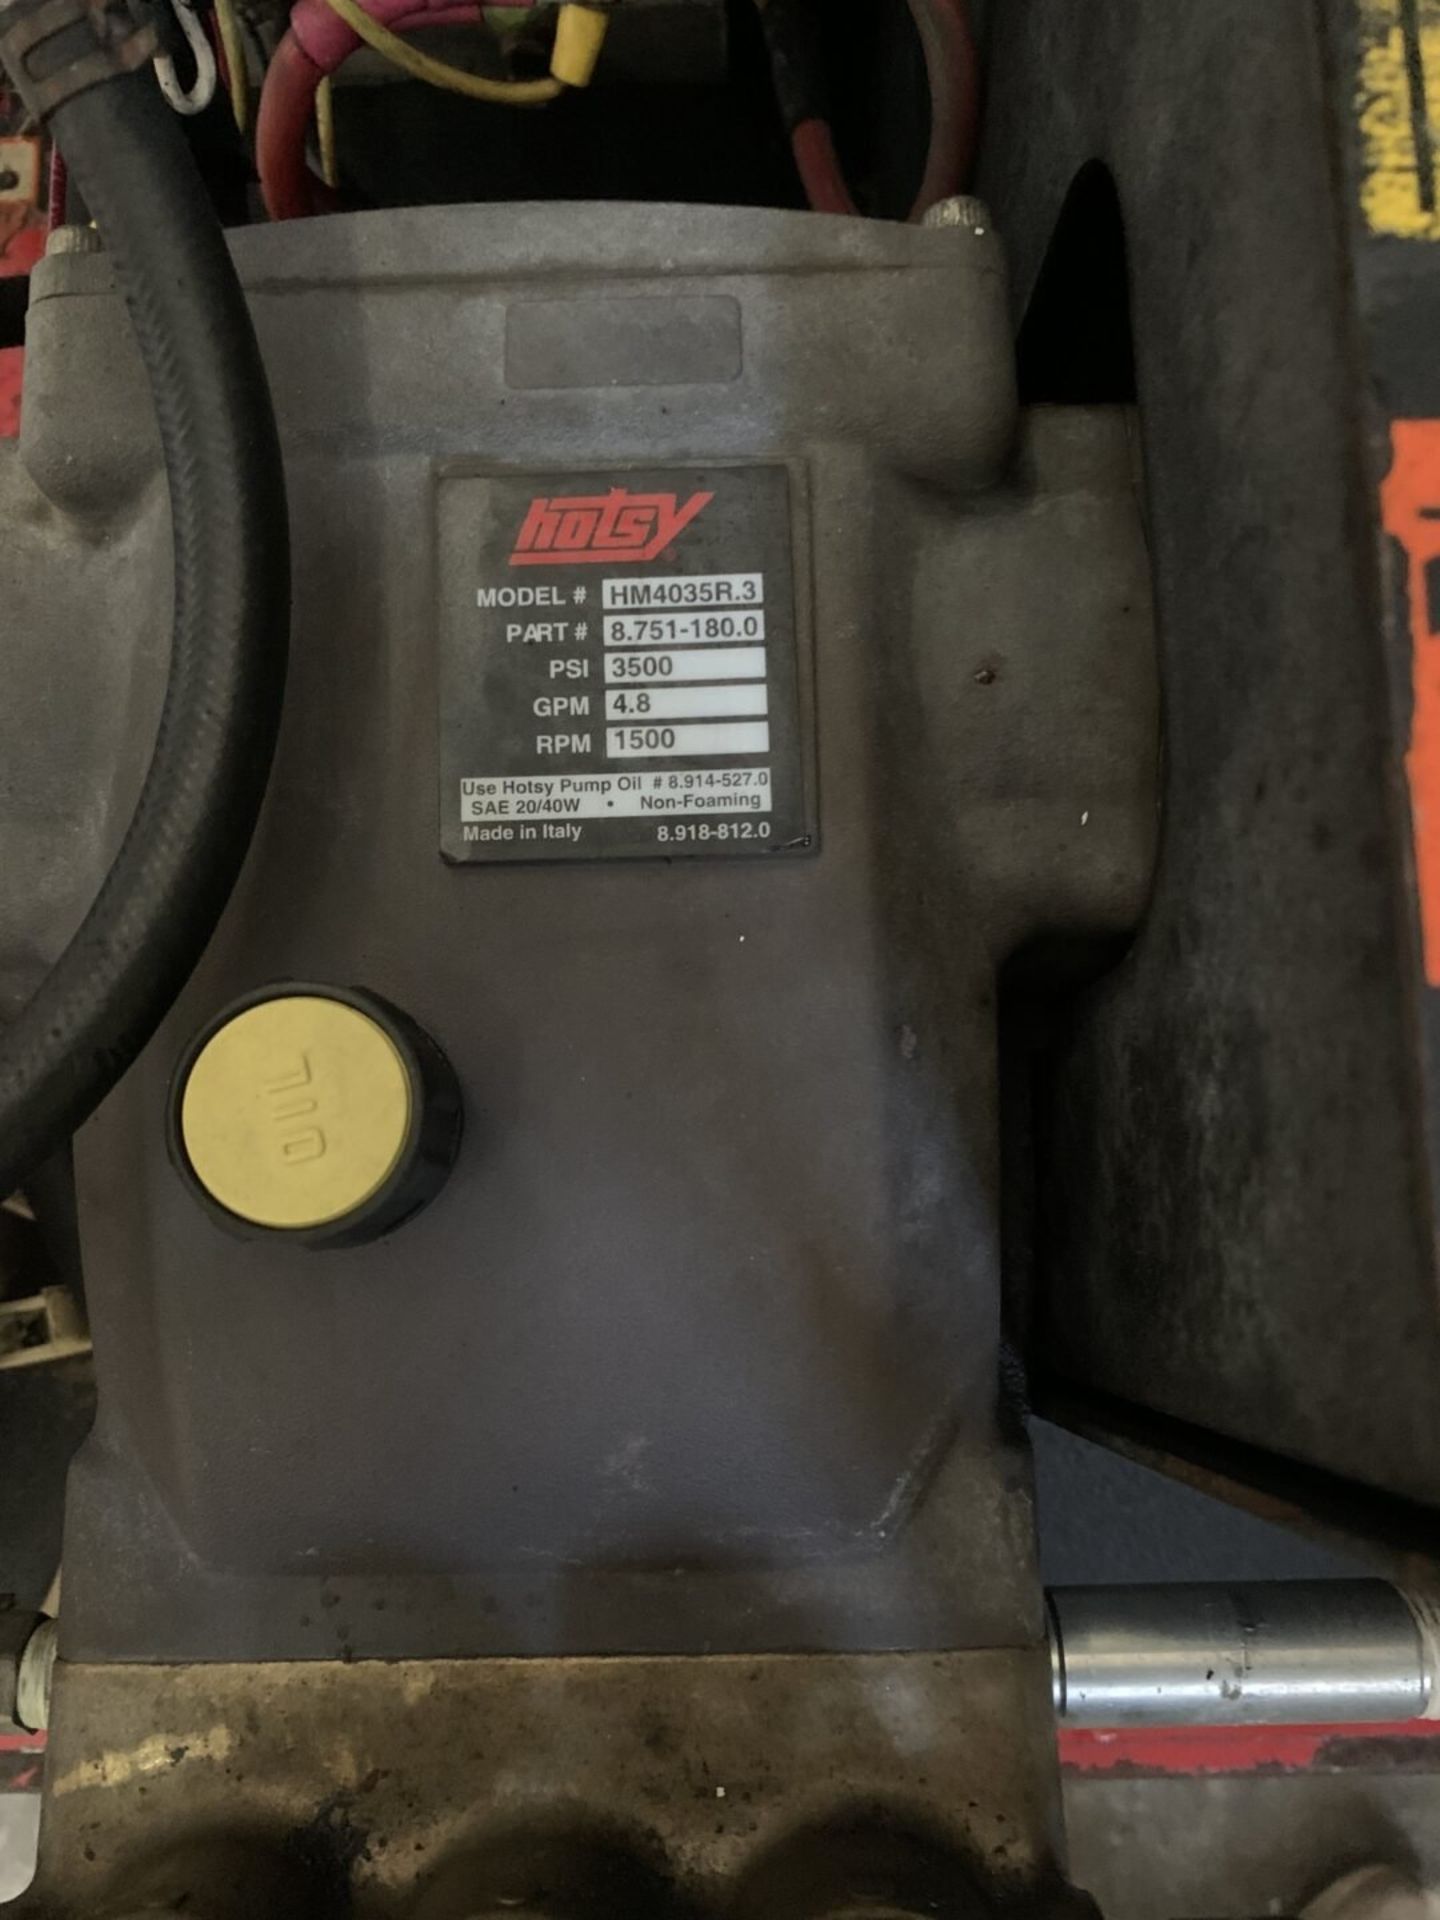 Hotsy 1200 Series Oil-Fired and Gasoline Powered/Belt Drive Heated Pressure Washer - Image 5 of 13